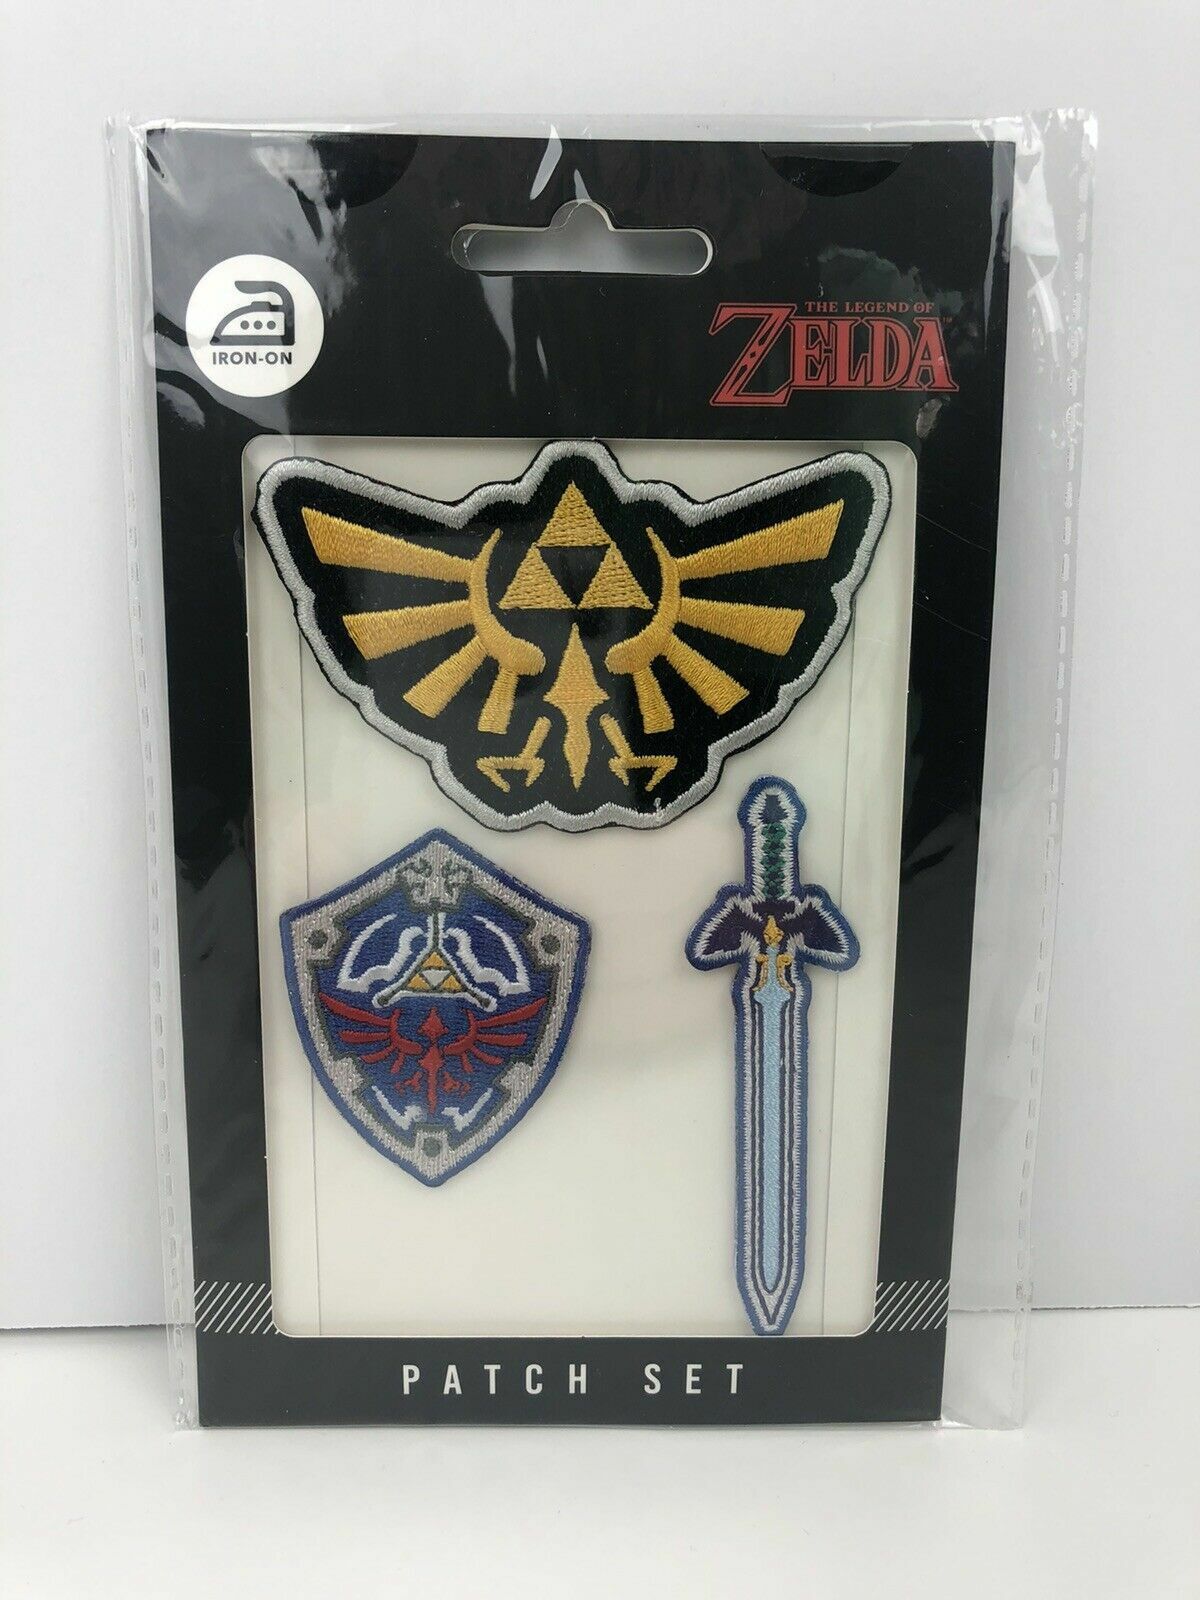 NEW Collectable THE Legend of Zelda 3 patch set *FREE DOMESTIC SHIPPING USA